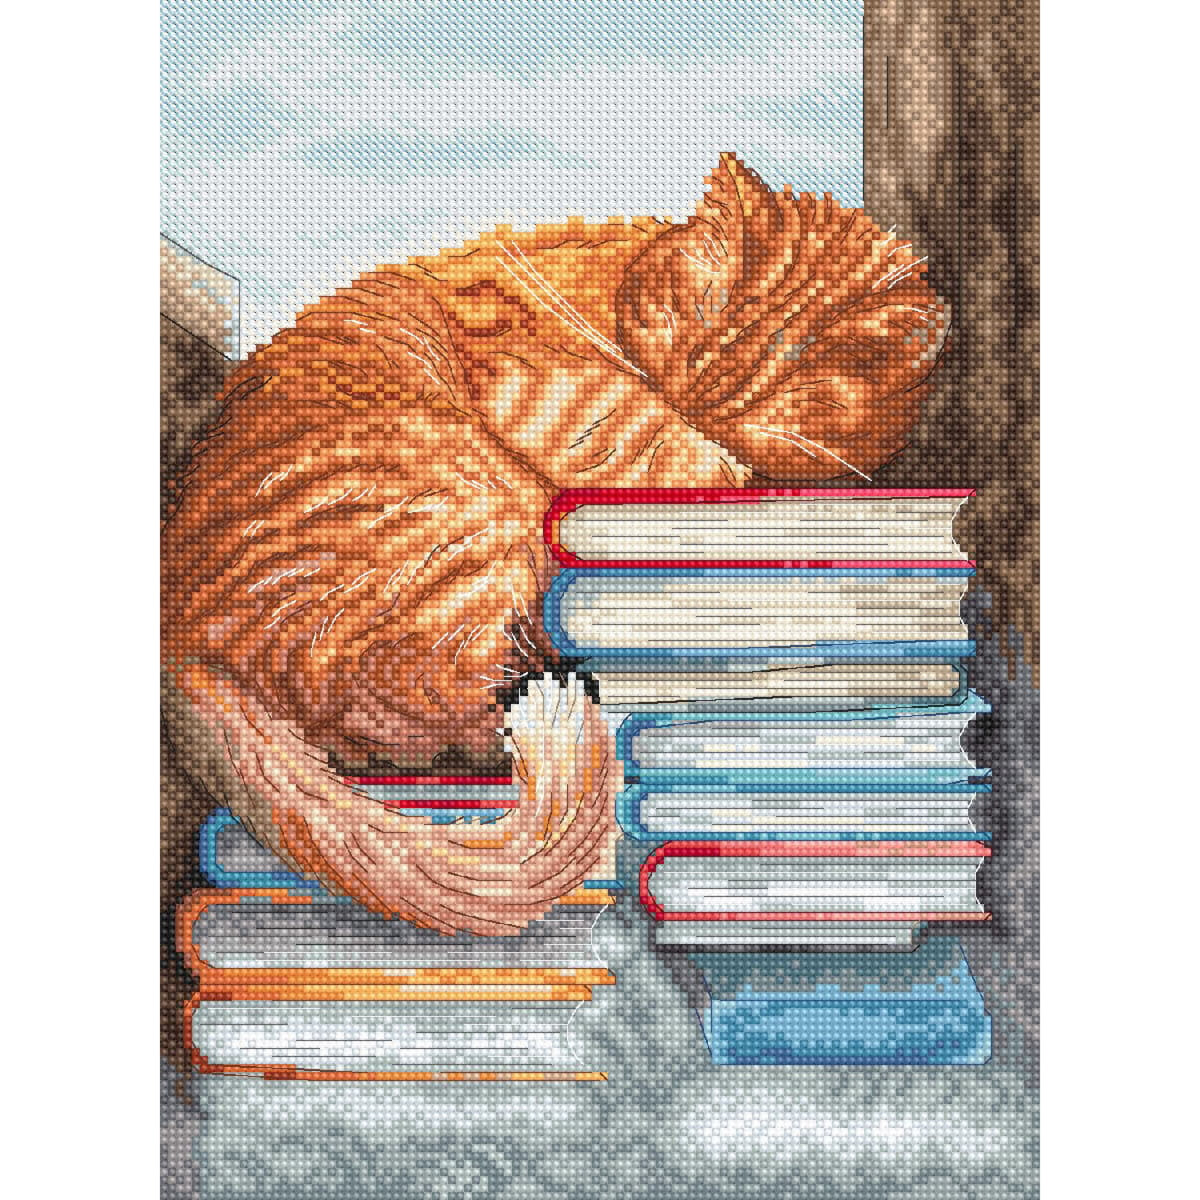 An embroidery kit from Letistitch showing an orange tabby...